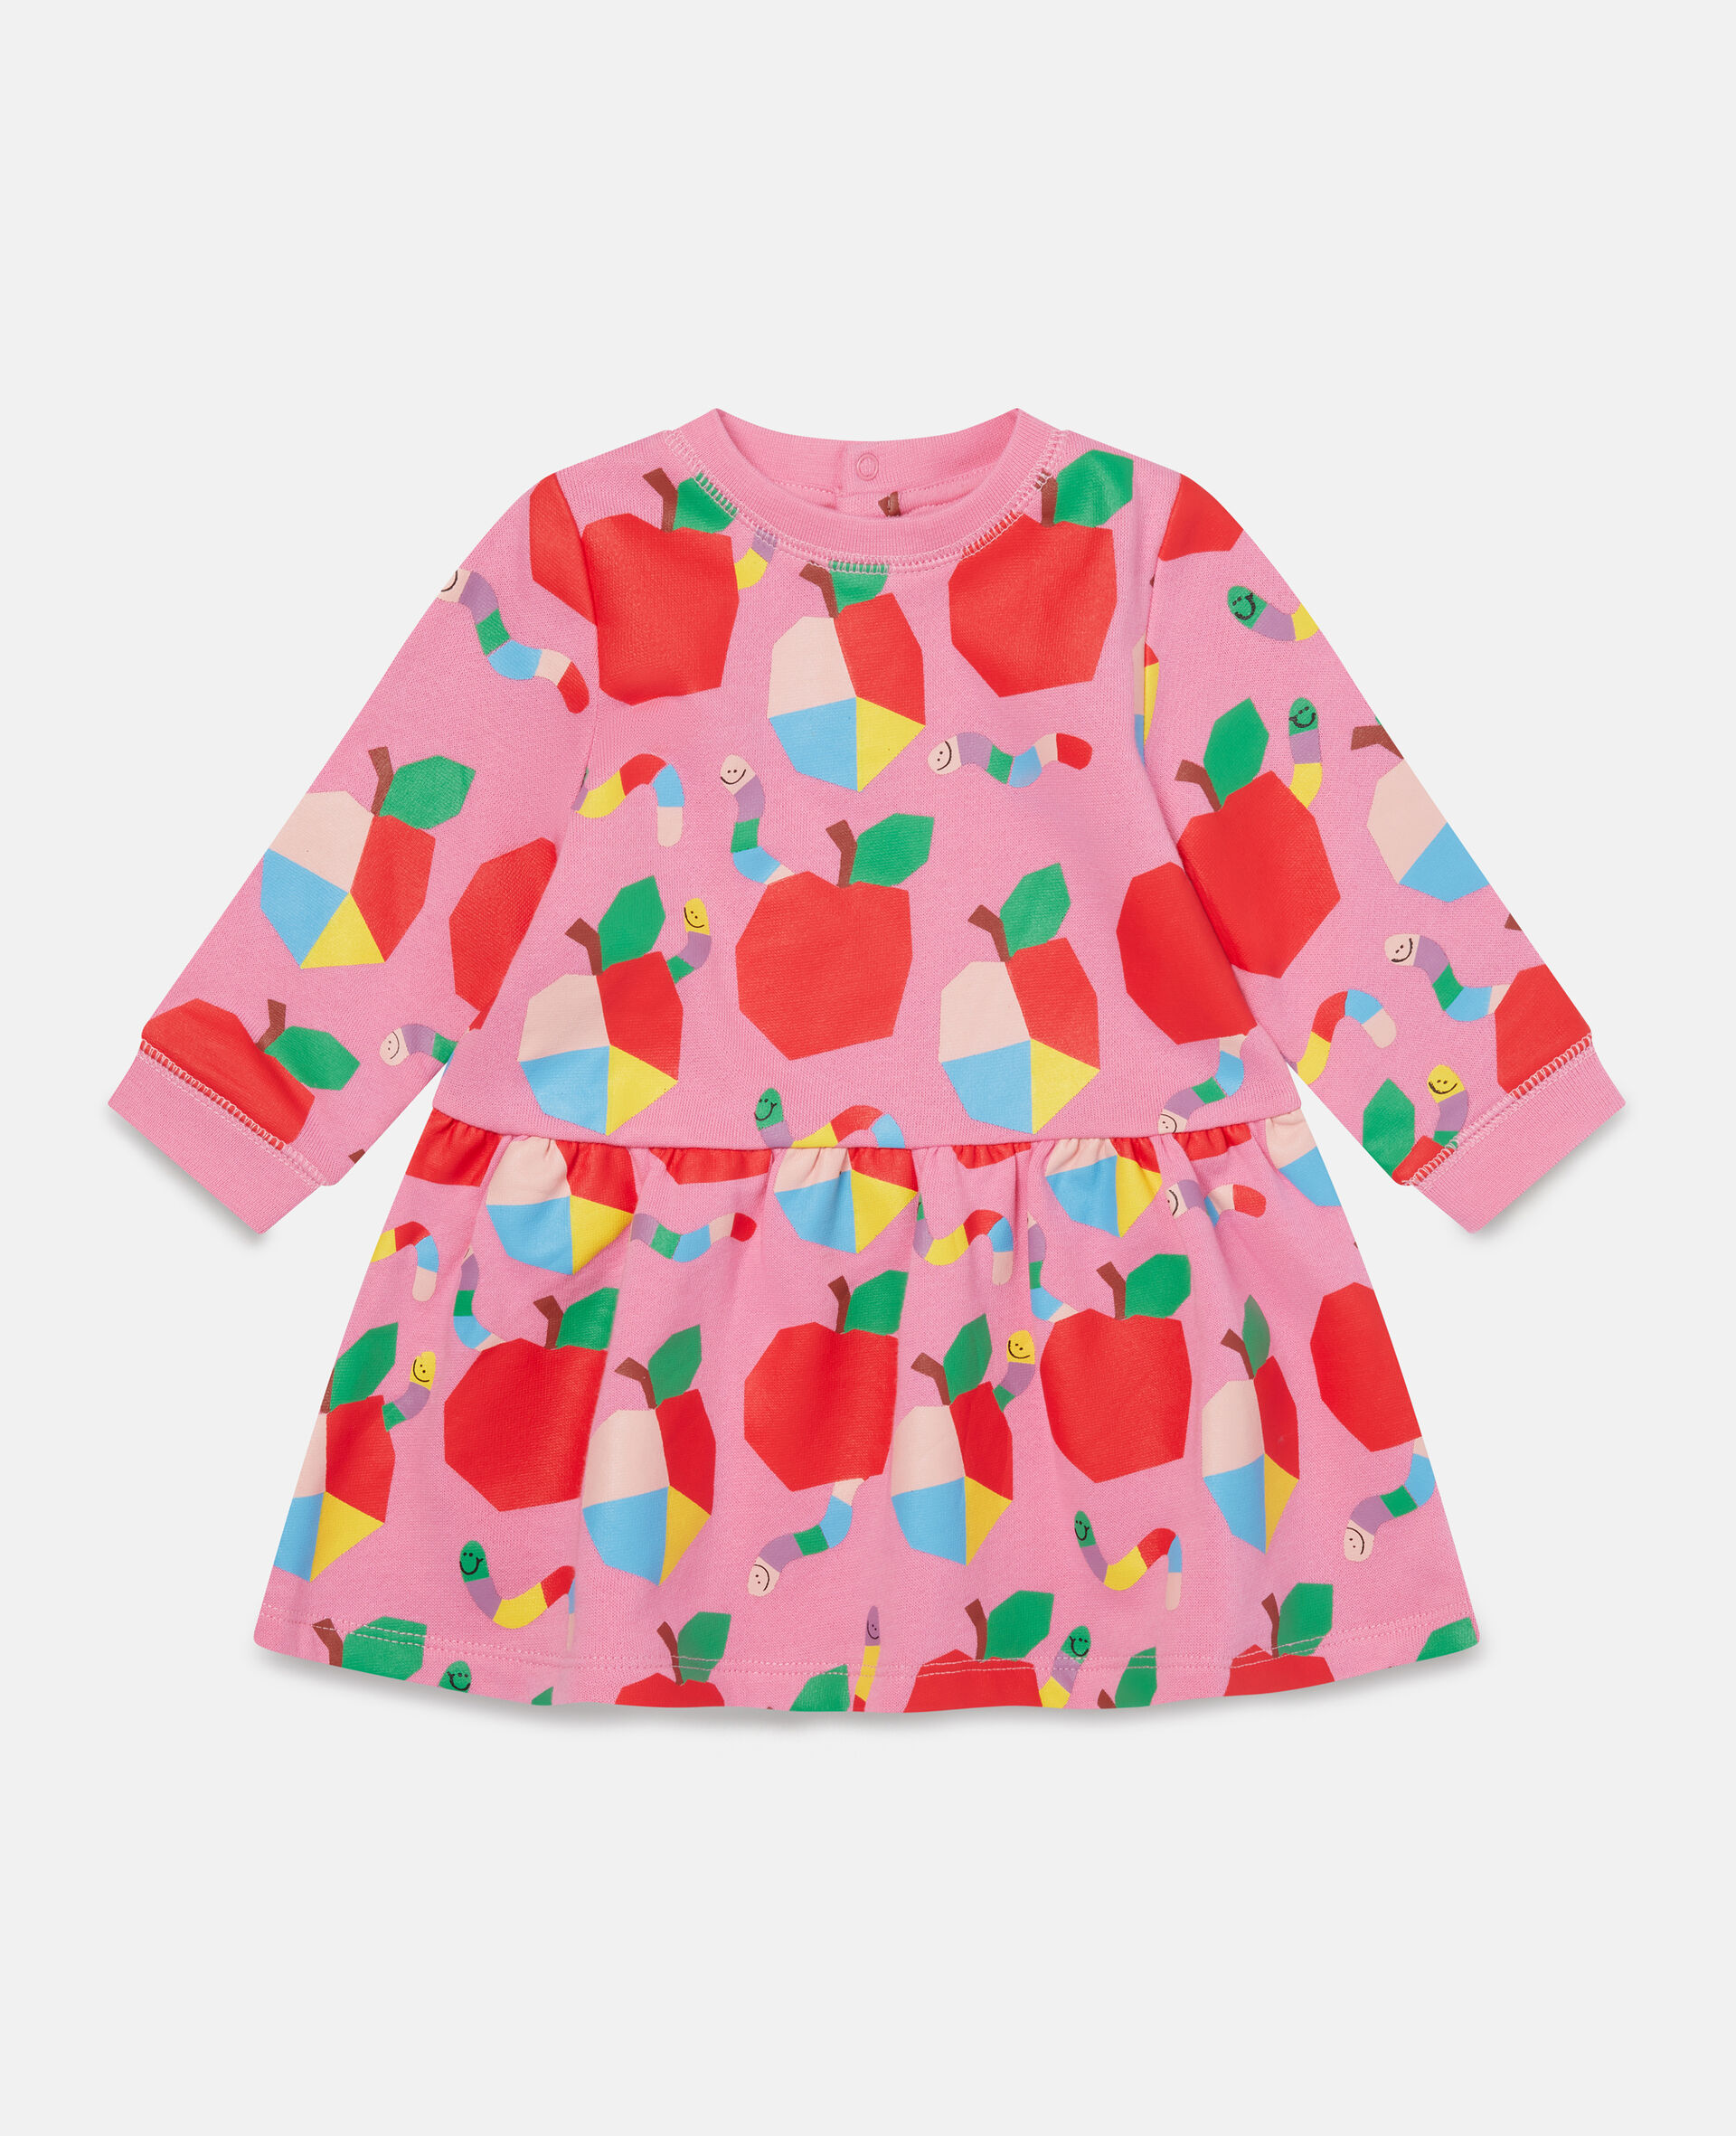 Cotton Fleece Apples and Worms Print Dress-Pink-large image number 0